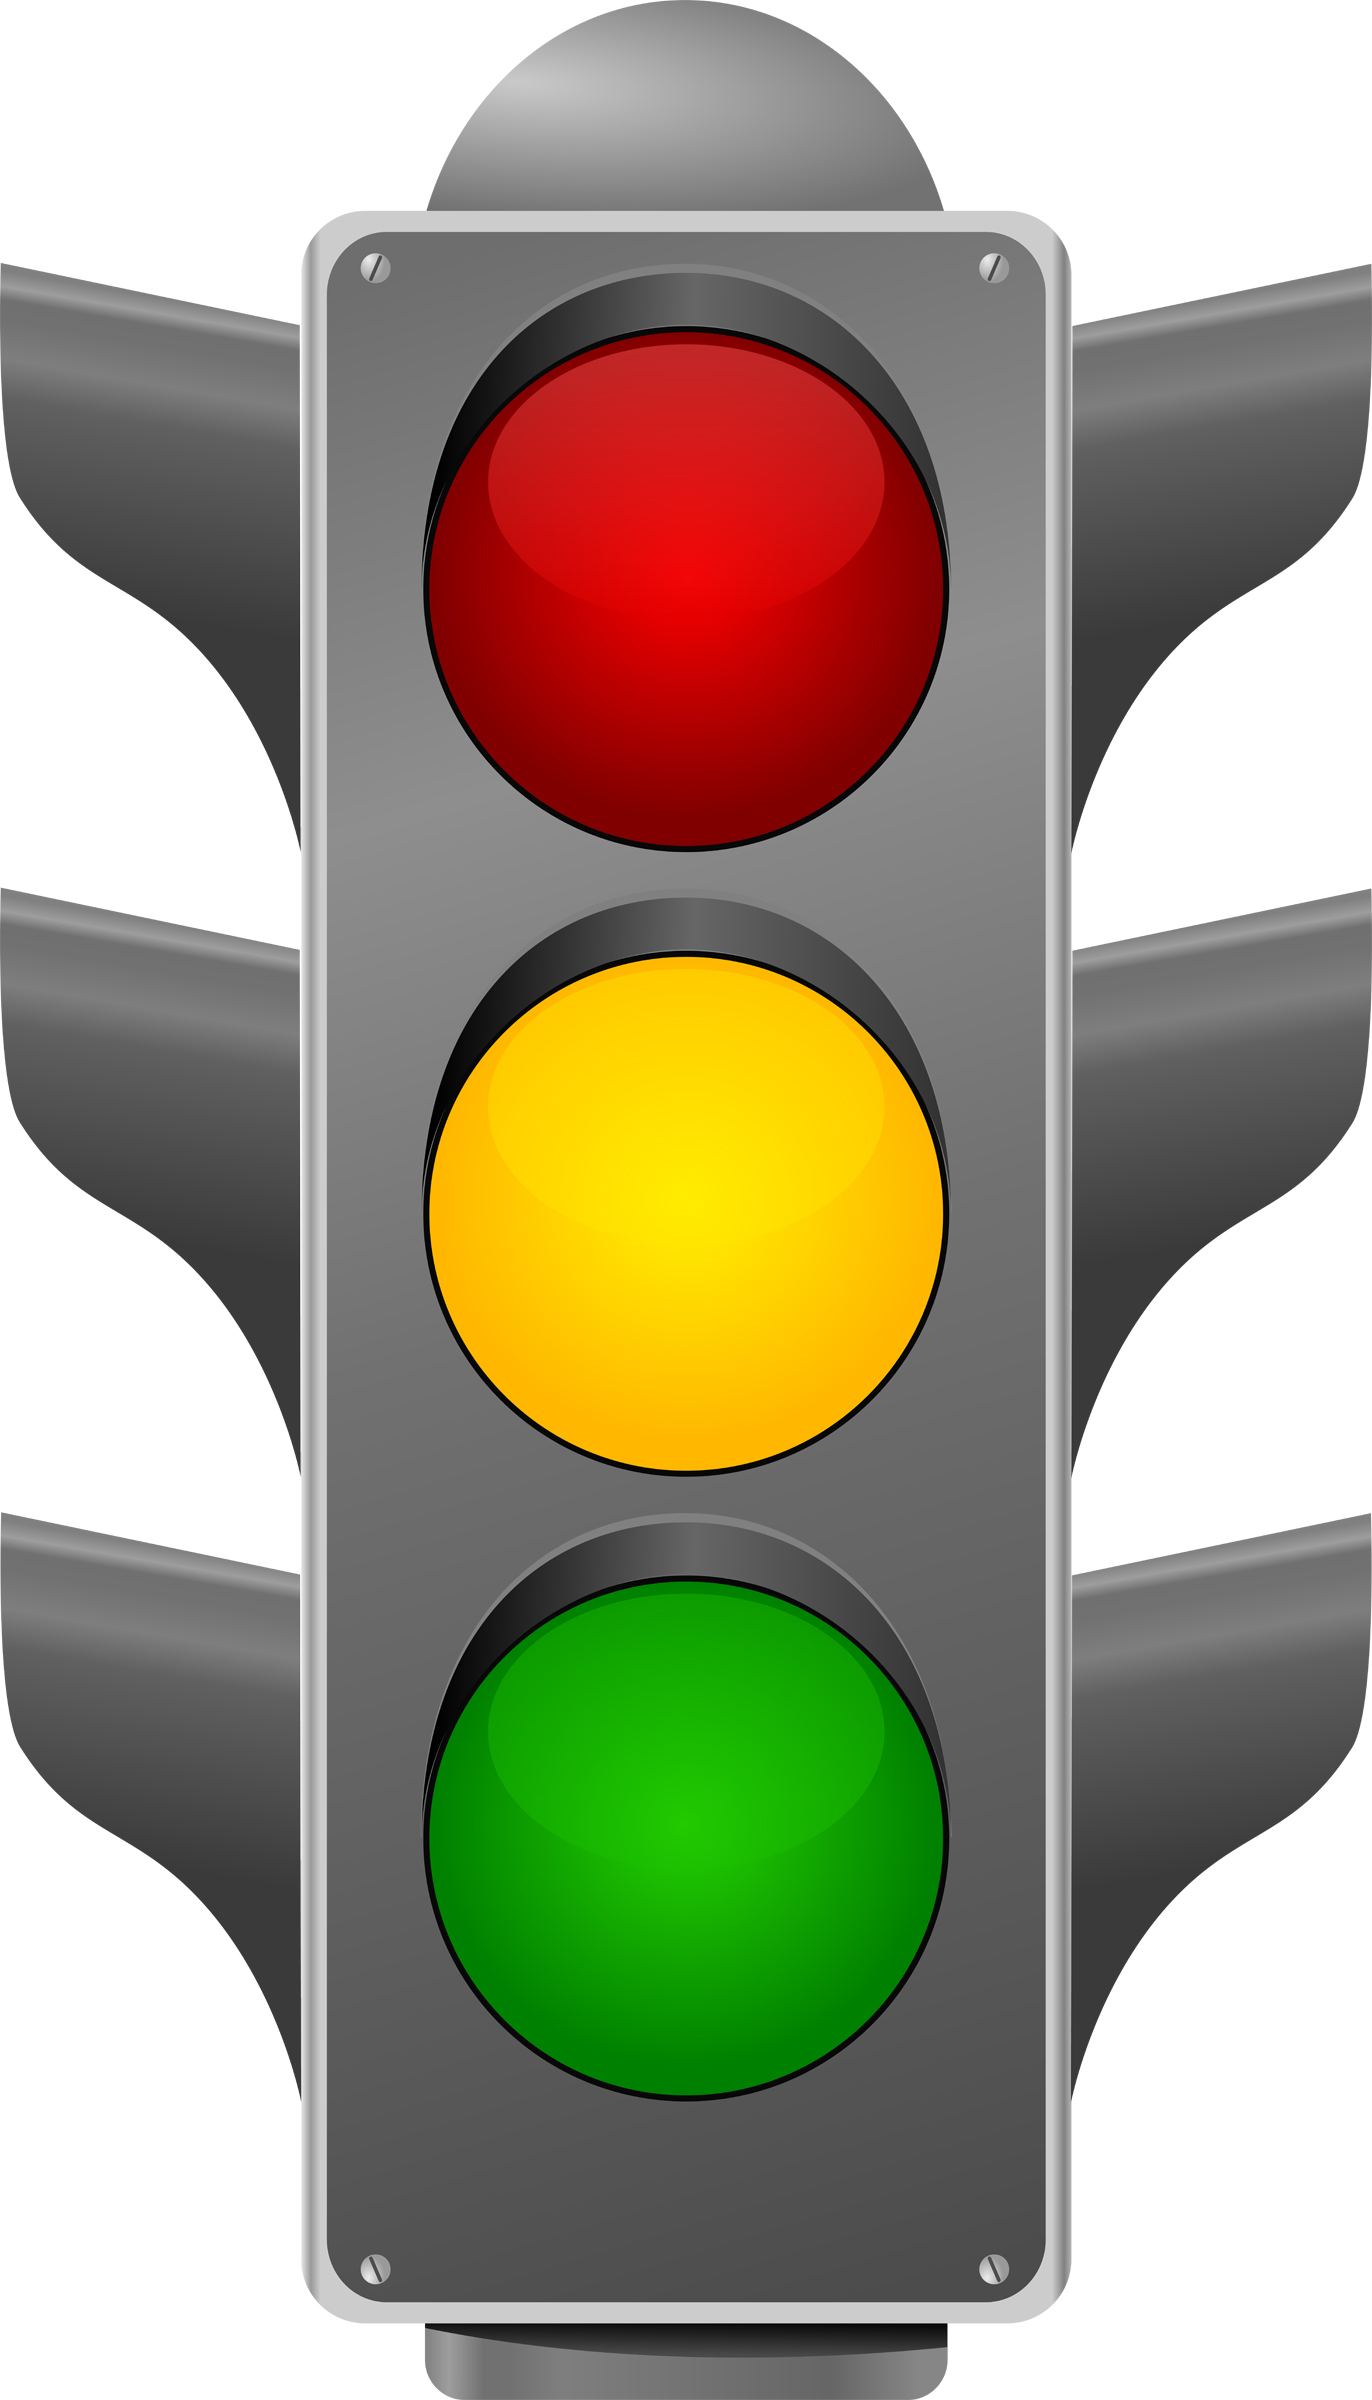 Stop Light Images  Pictures - Becuo